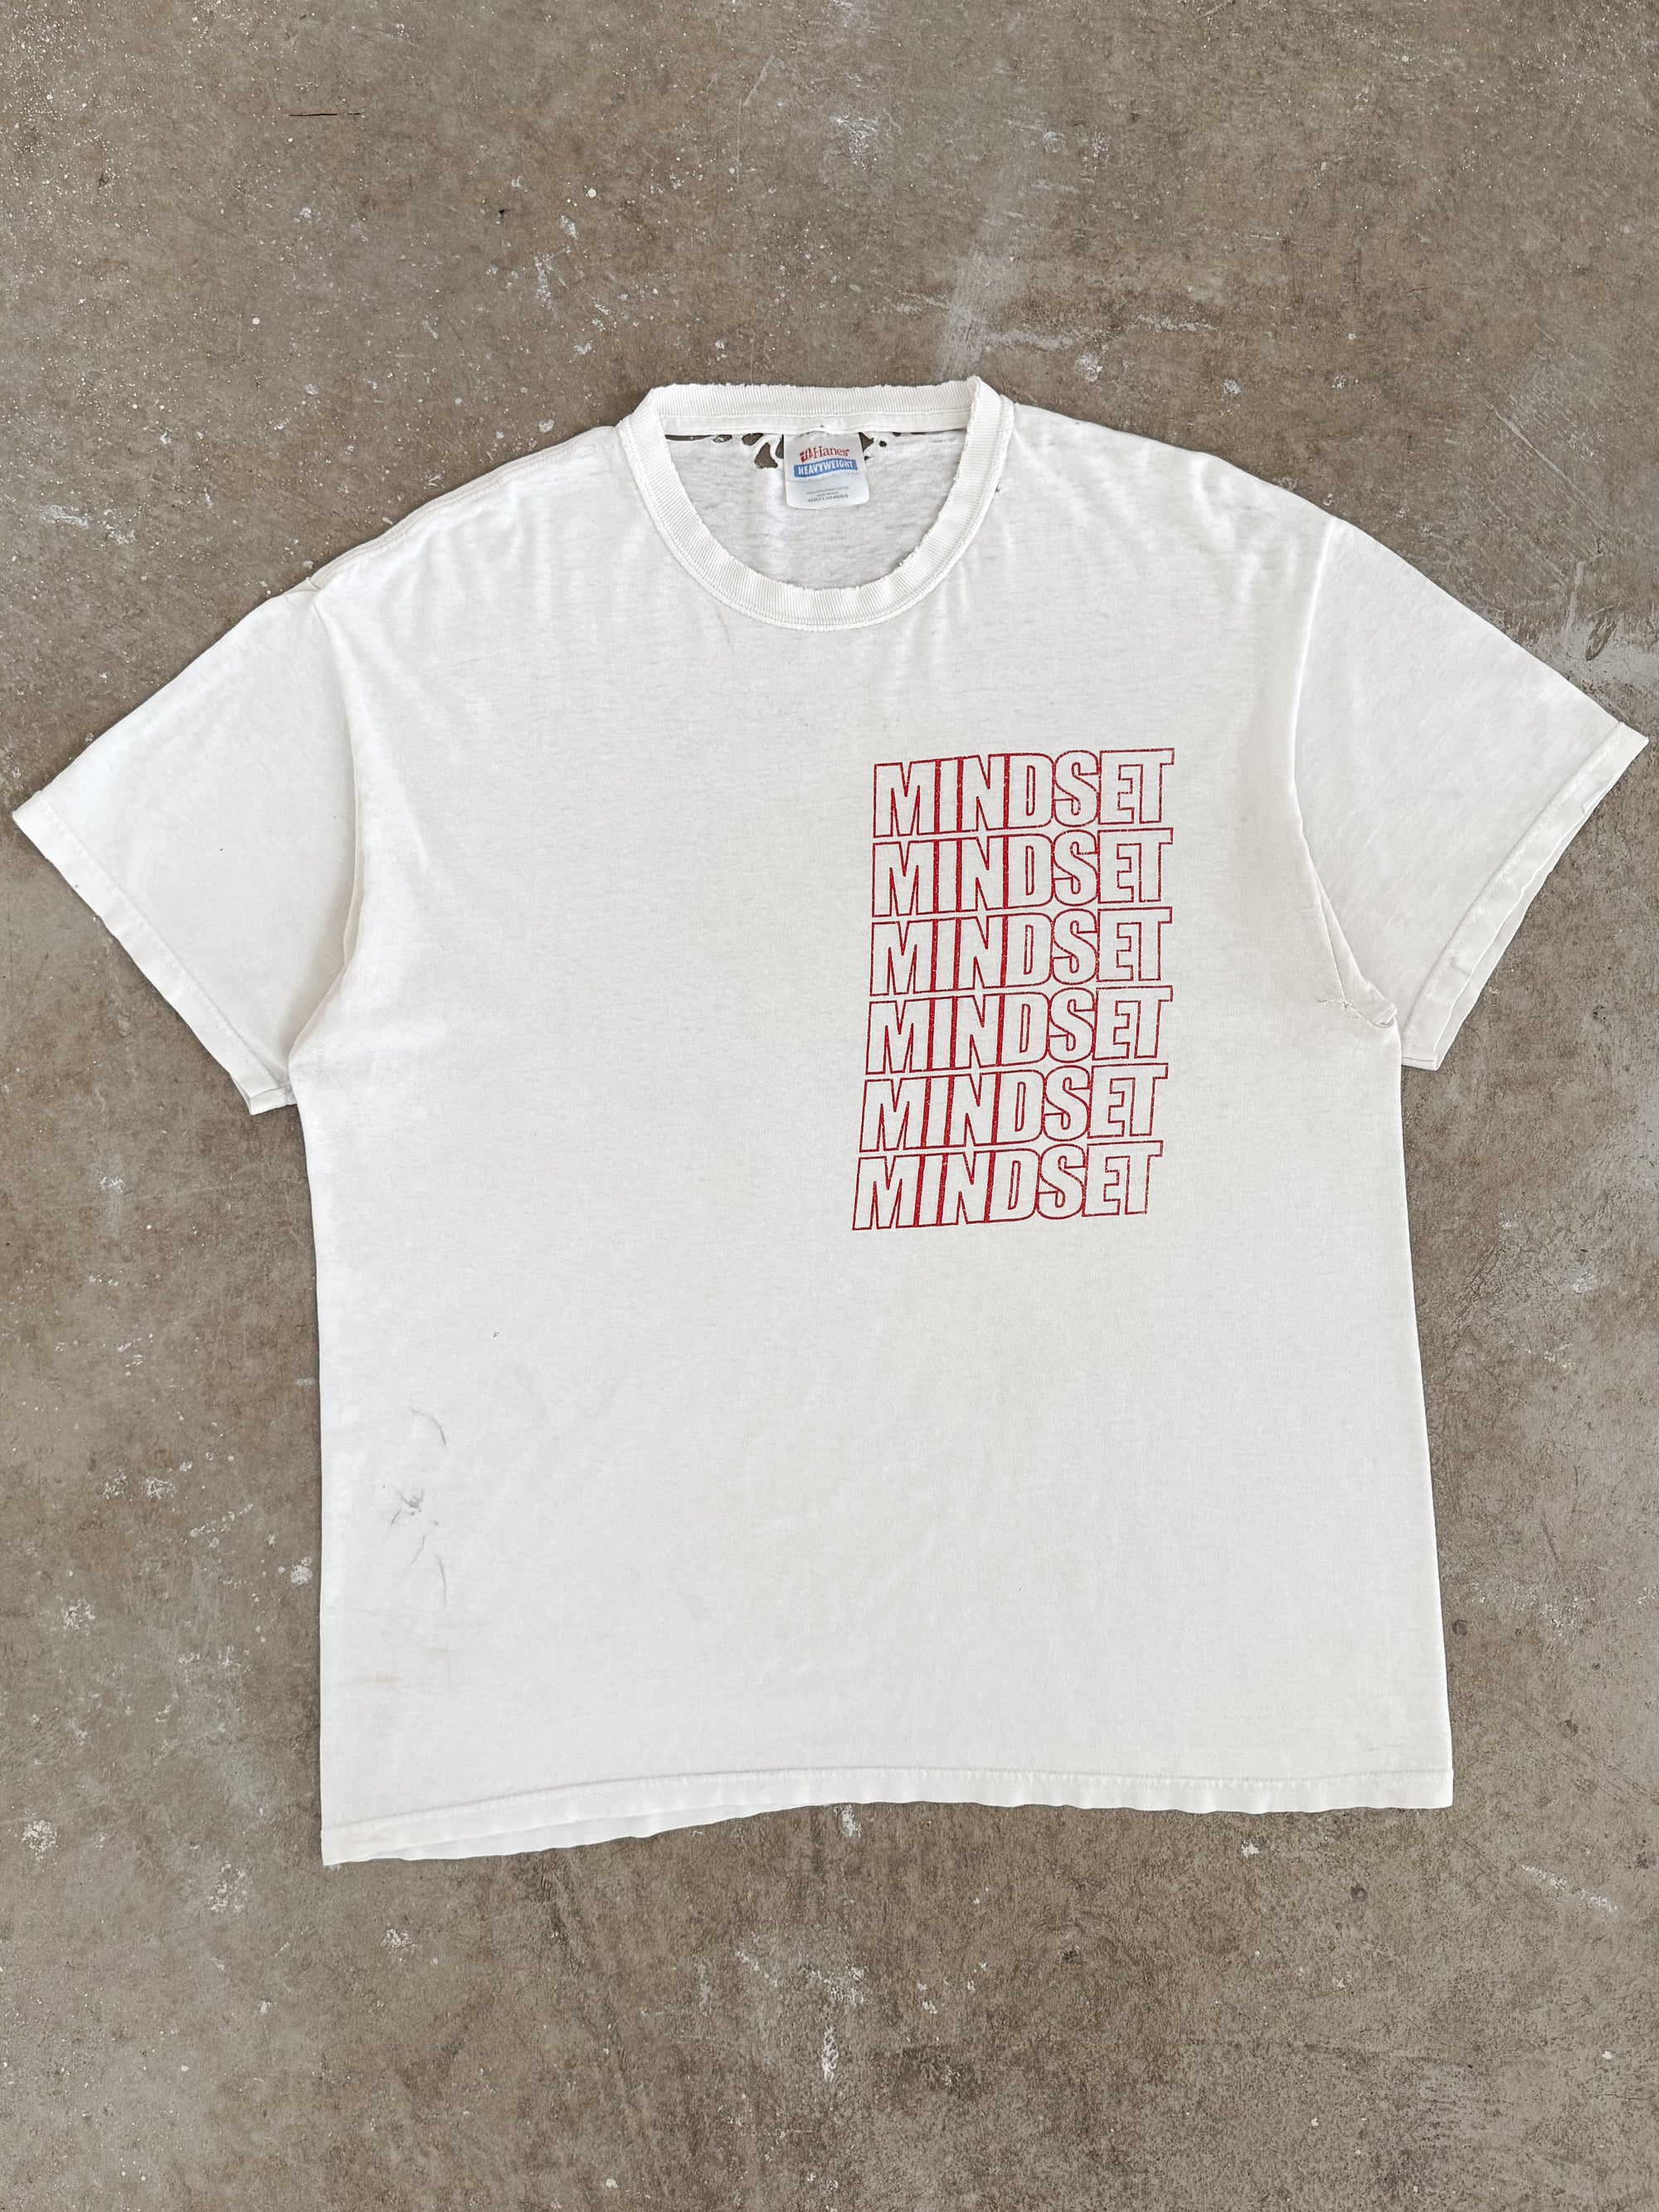 2010s "Hear Me Now" Distressed Mindset Band Tee (L)